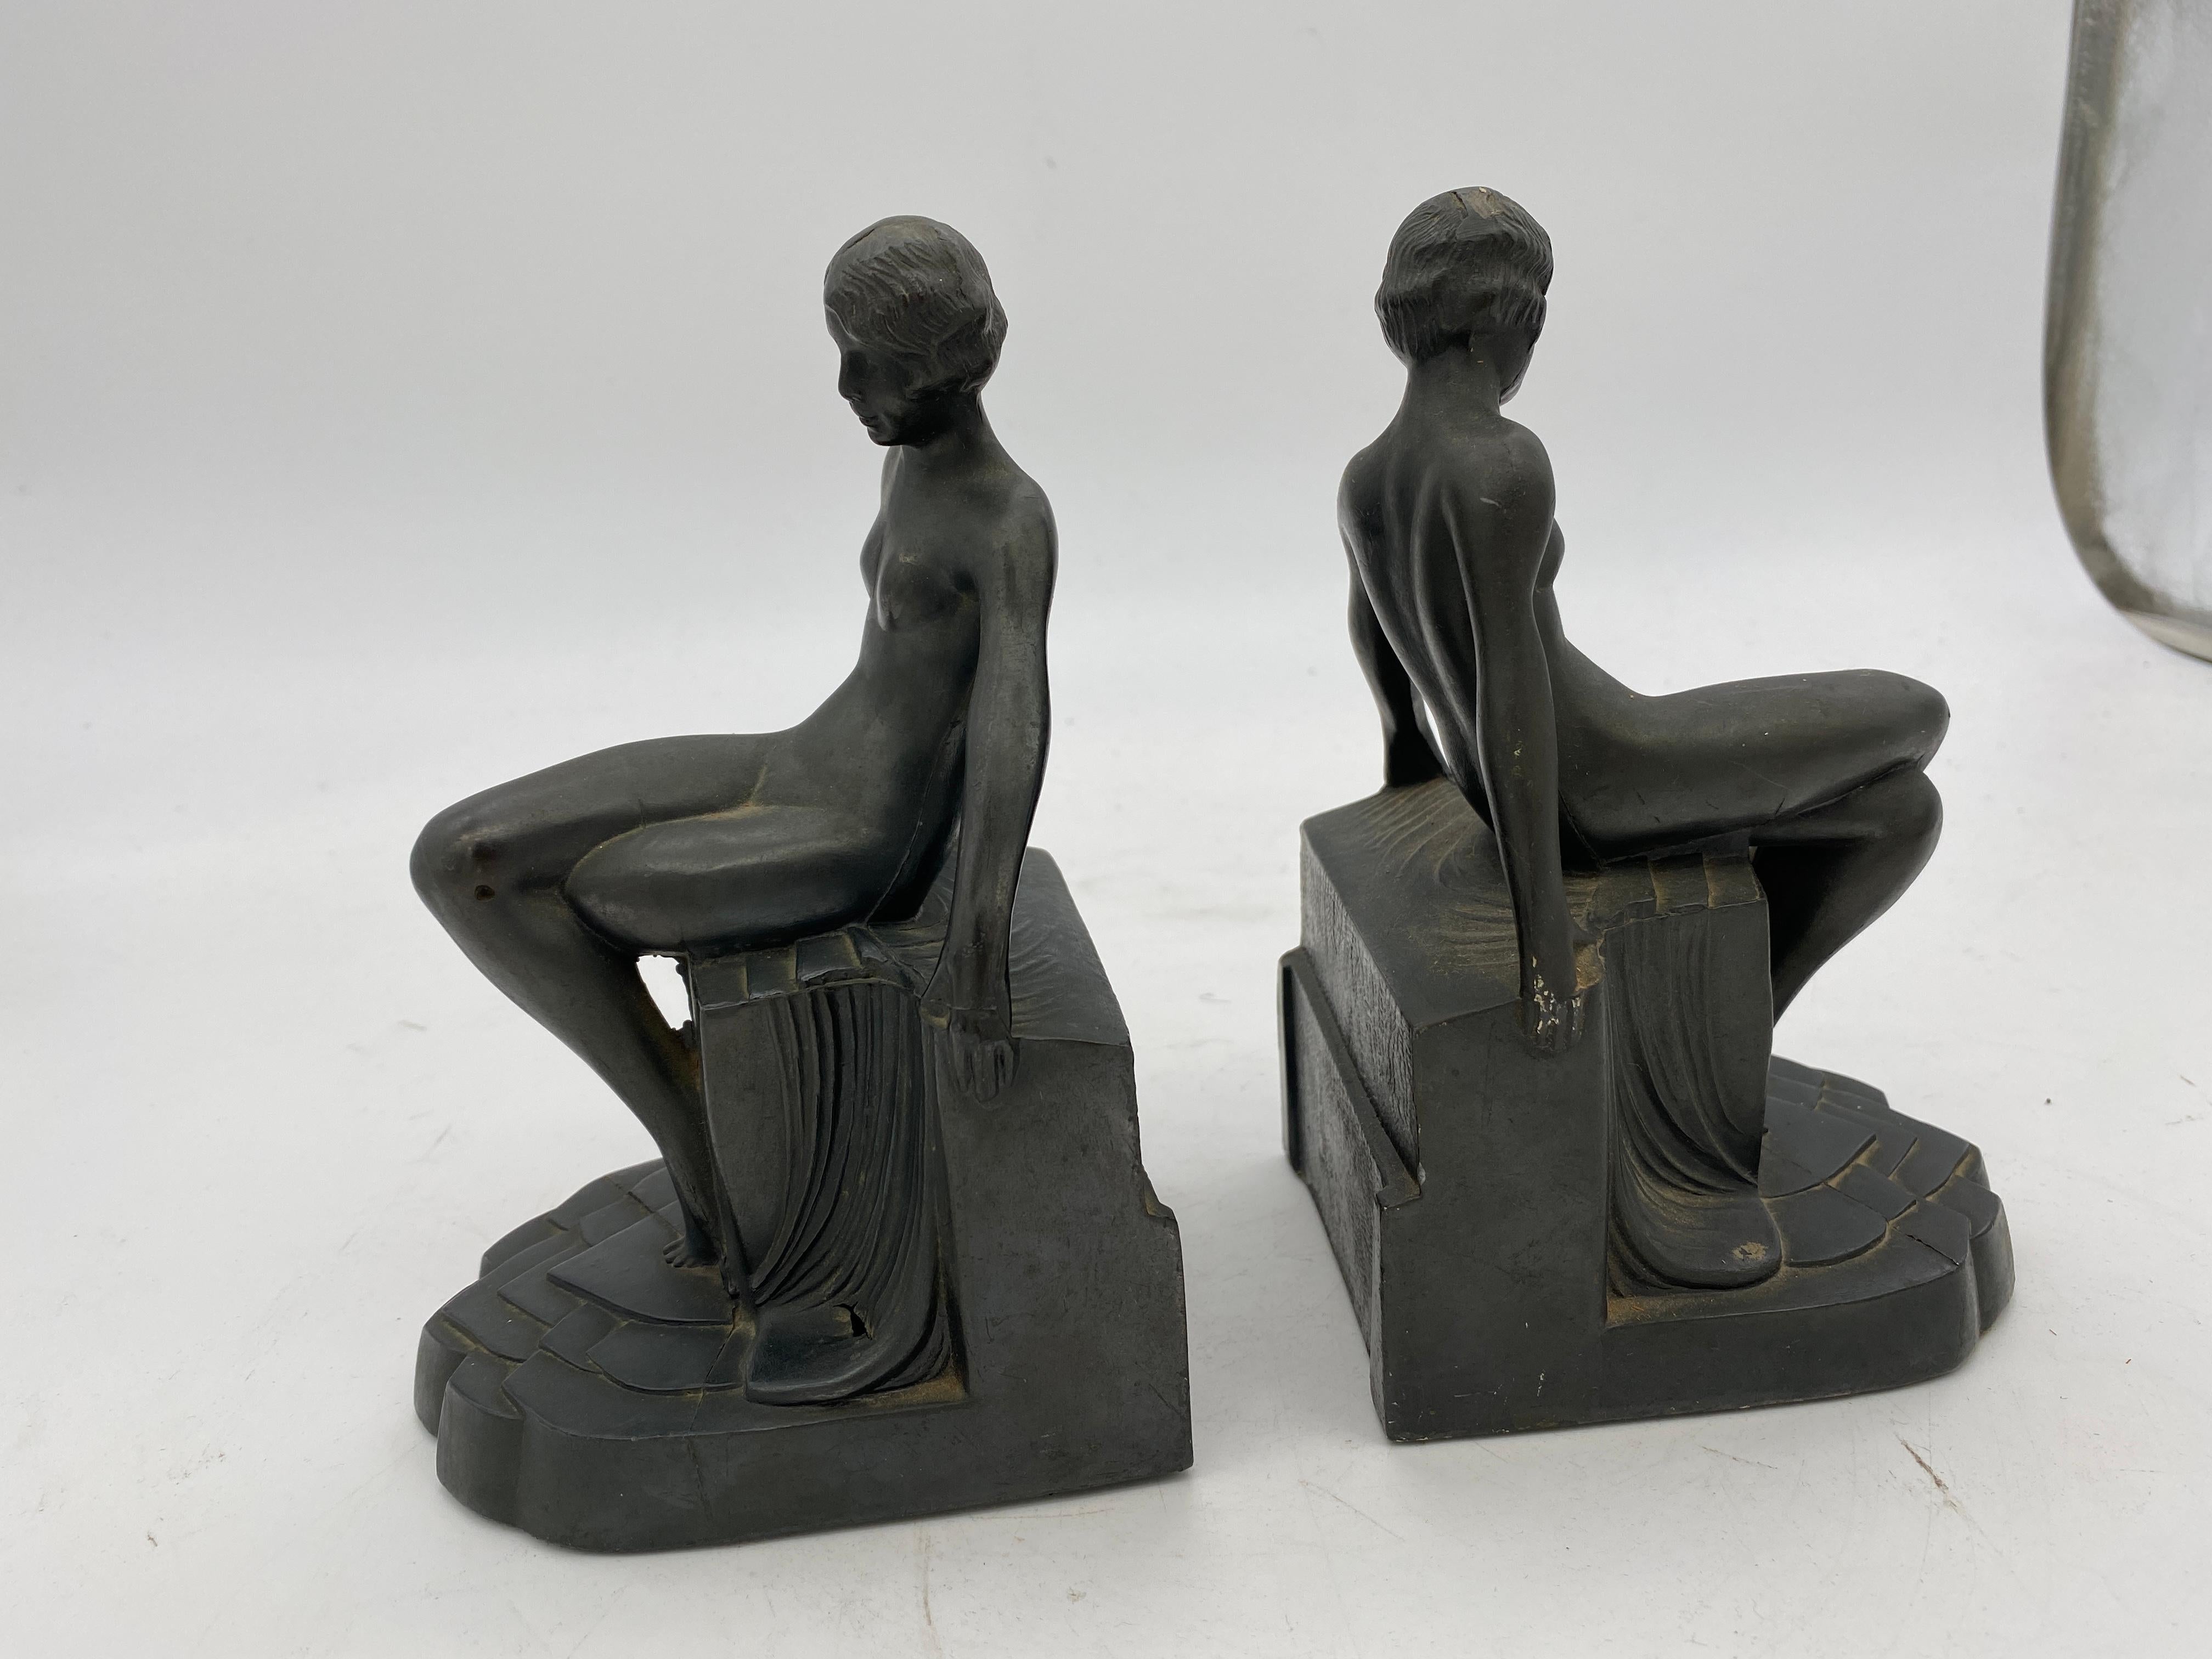 Original nude Art Deco flapper girl spelter metal bookends by Nuart featuring nude women sitting on a pedestal.